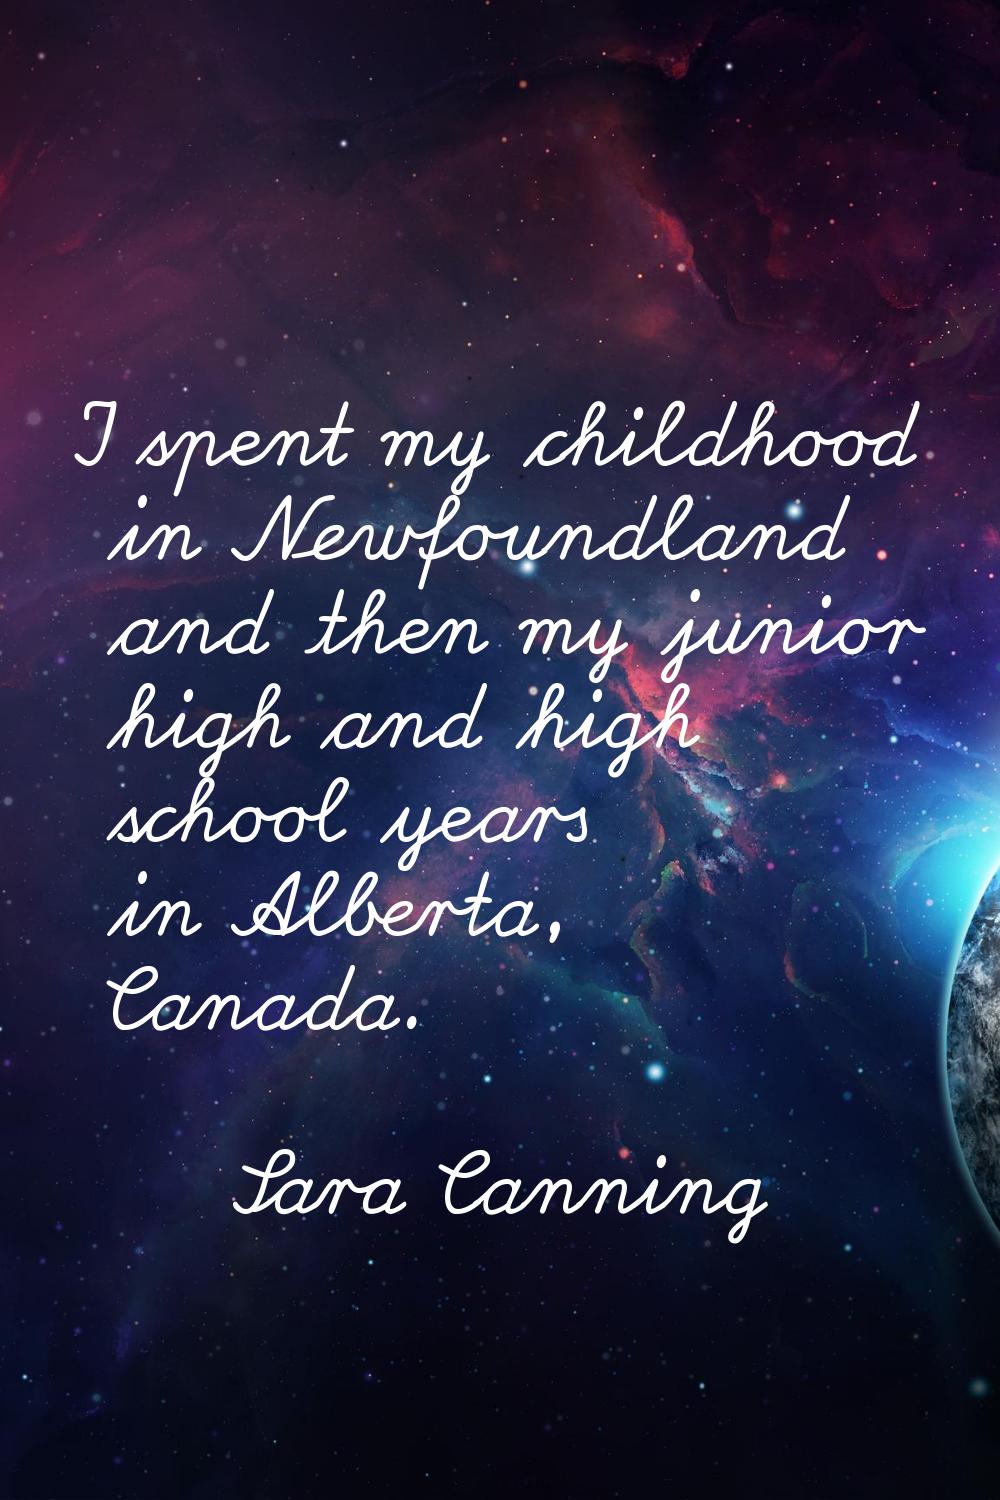 I spent my childhood in Newfoundland and then my junior high and high school years in Alberta, Cana